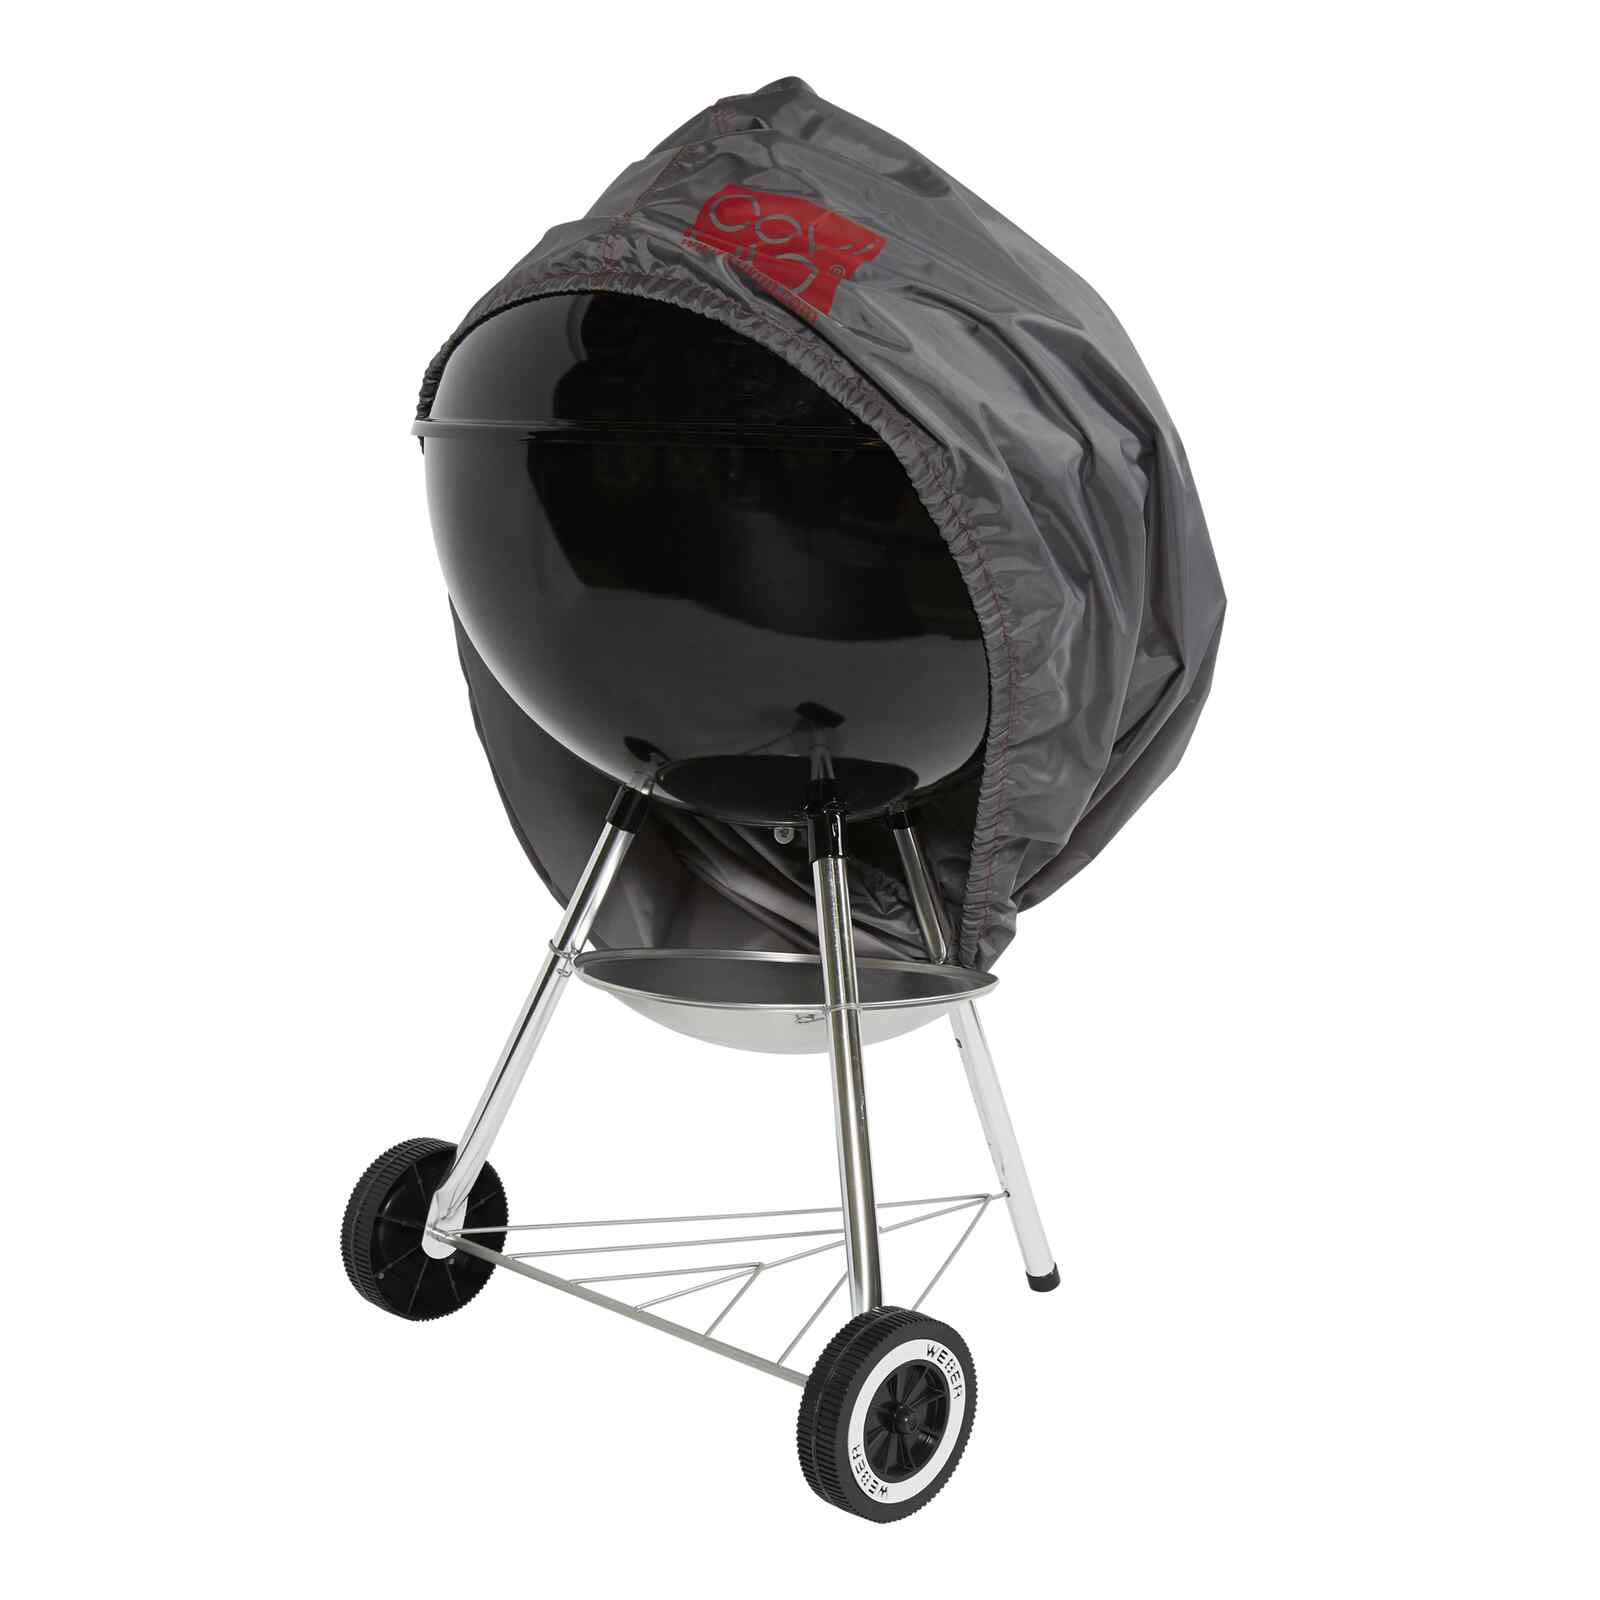 Housse de protection barbecue rond